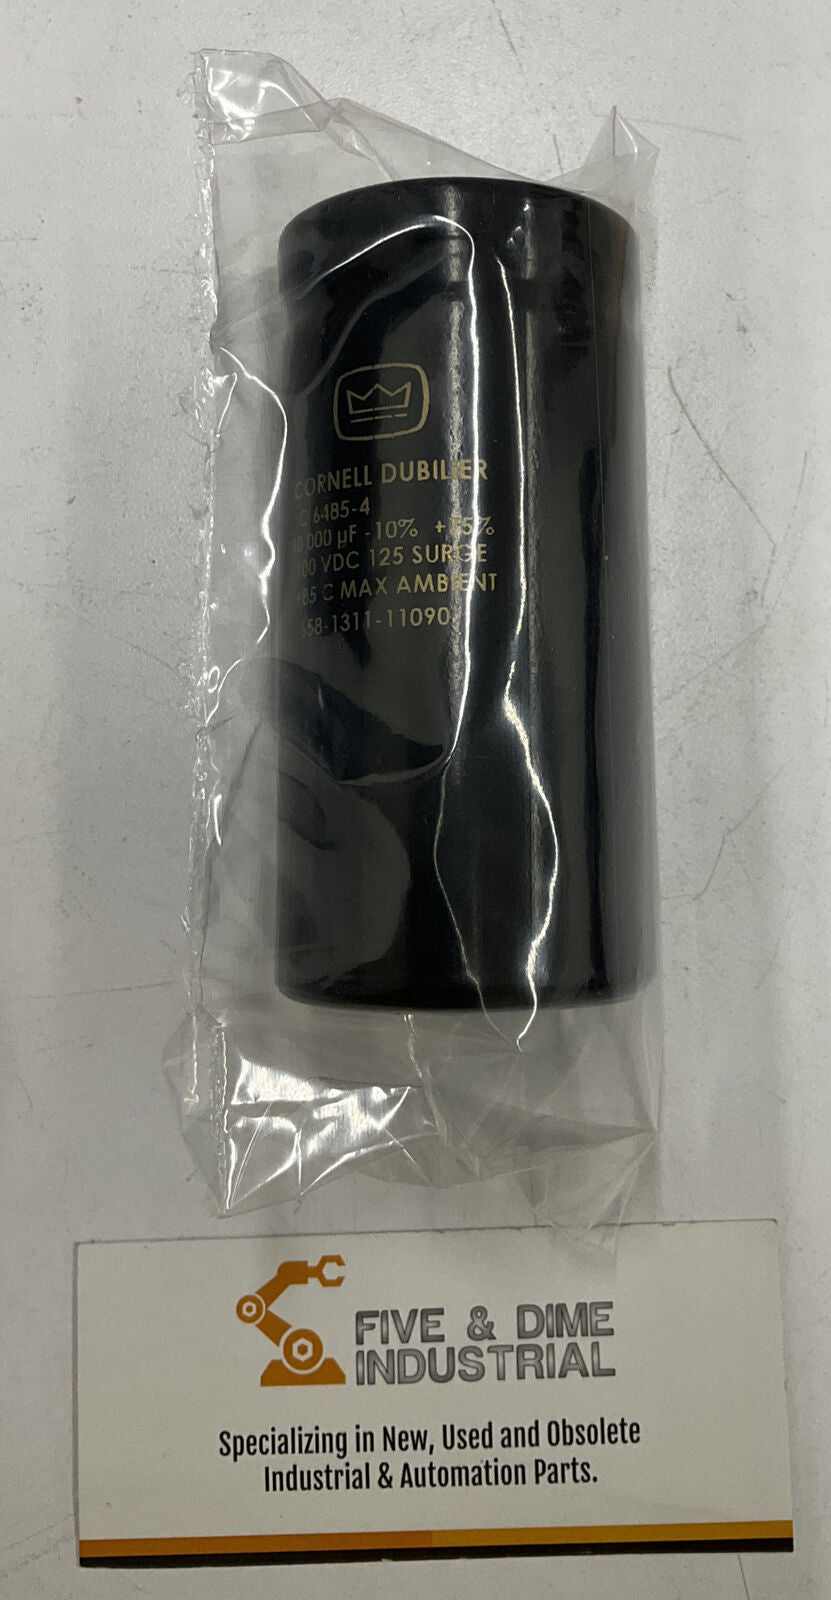 Crown Cornell Dubilier C6485-4 10,000 uf 100VDC Capacitor (CL211)